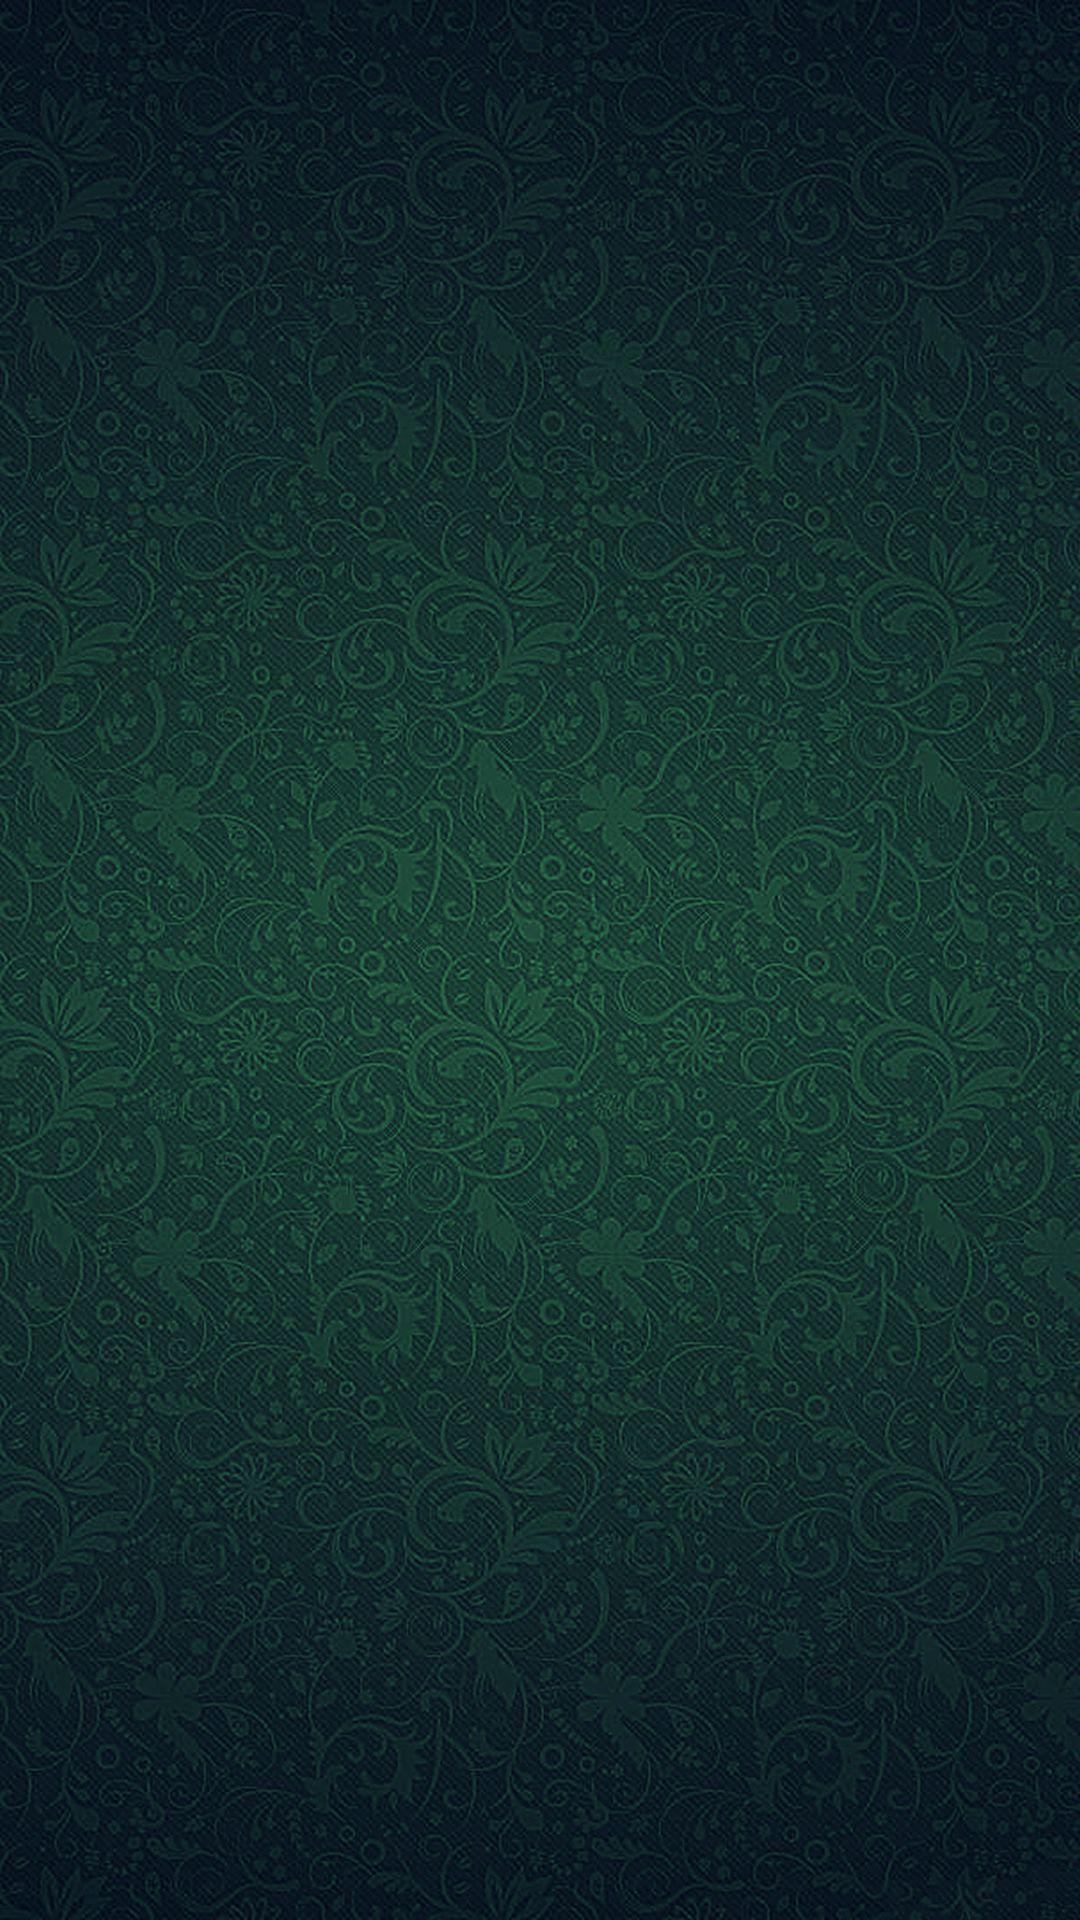 Emerald Green Wallpapers - Top Free Emerald Green Backgrounds